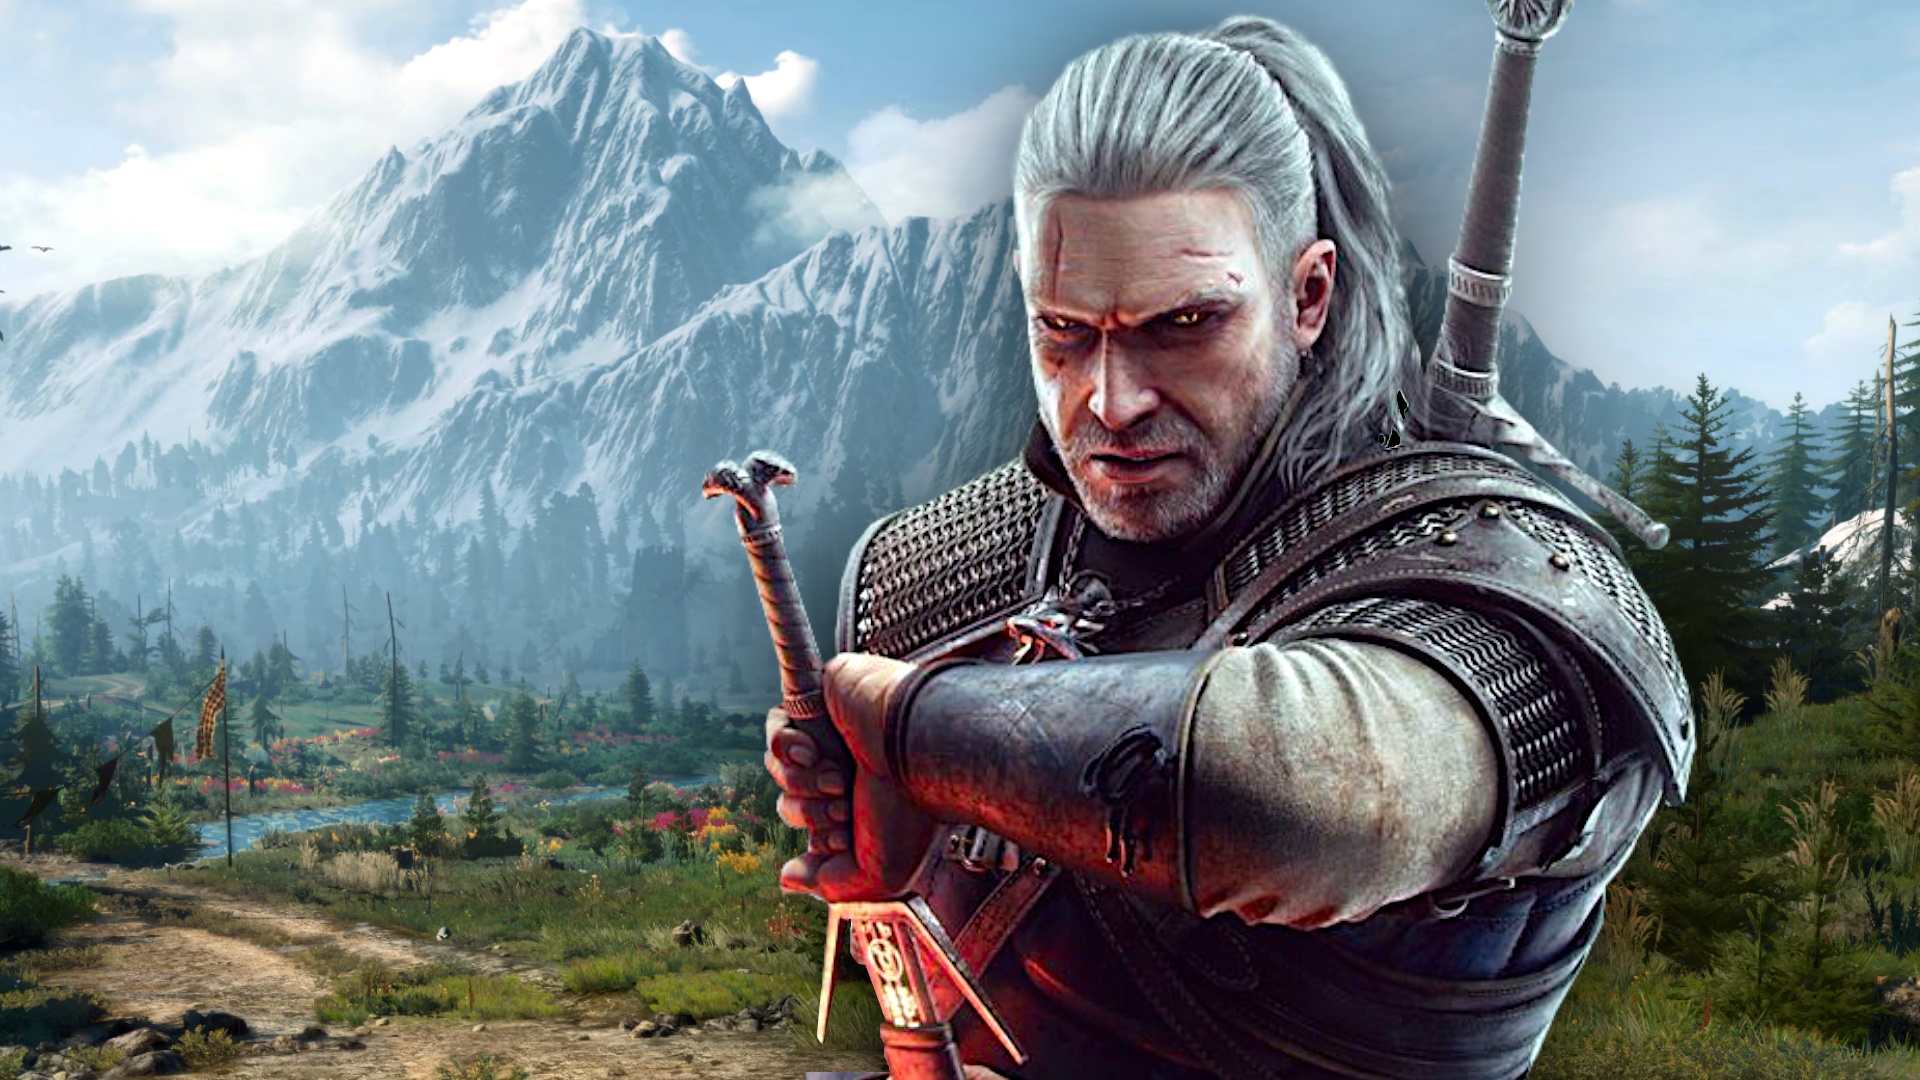 CD Projekt will put the tool used to create The Witcher 3 into fans' hands on May 21